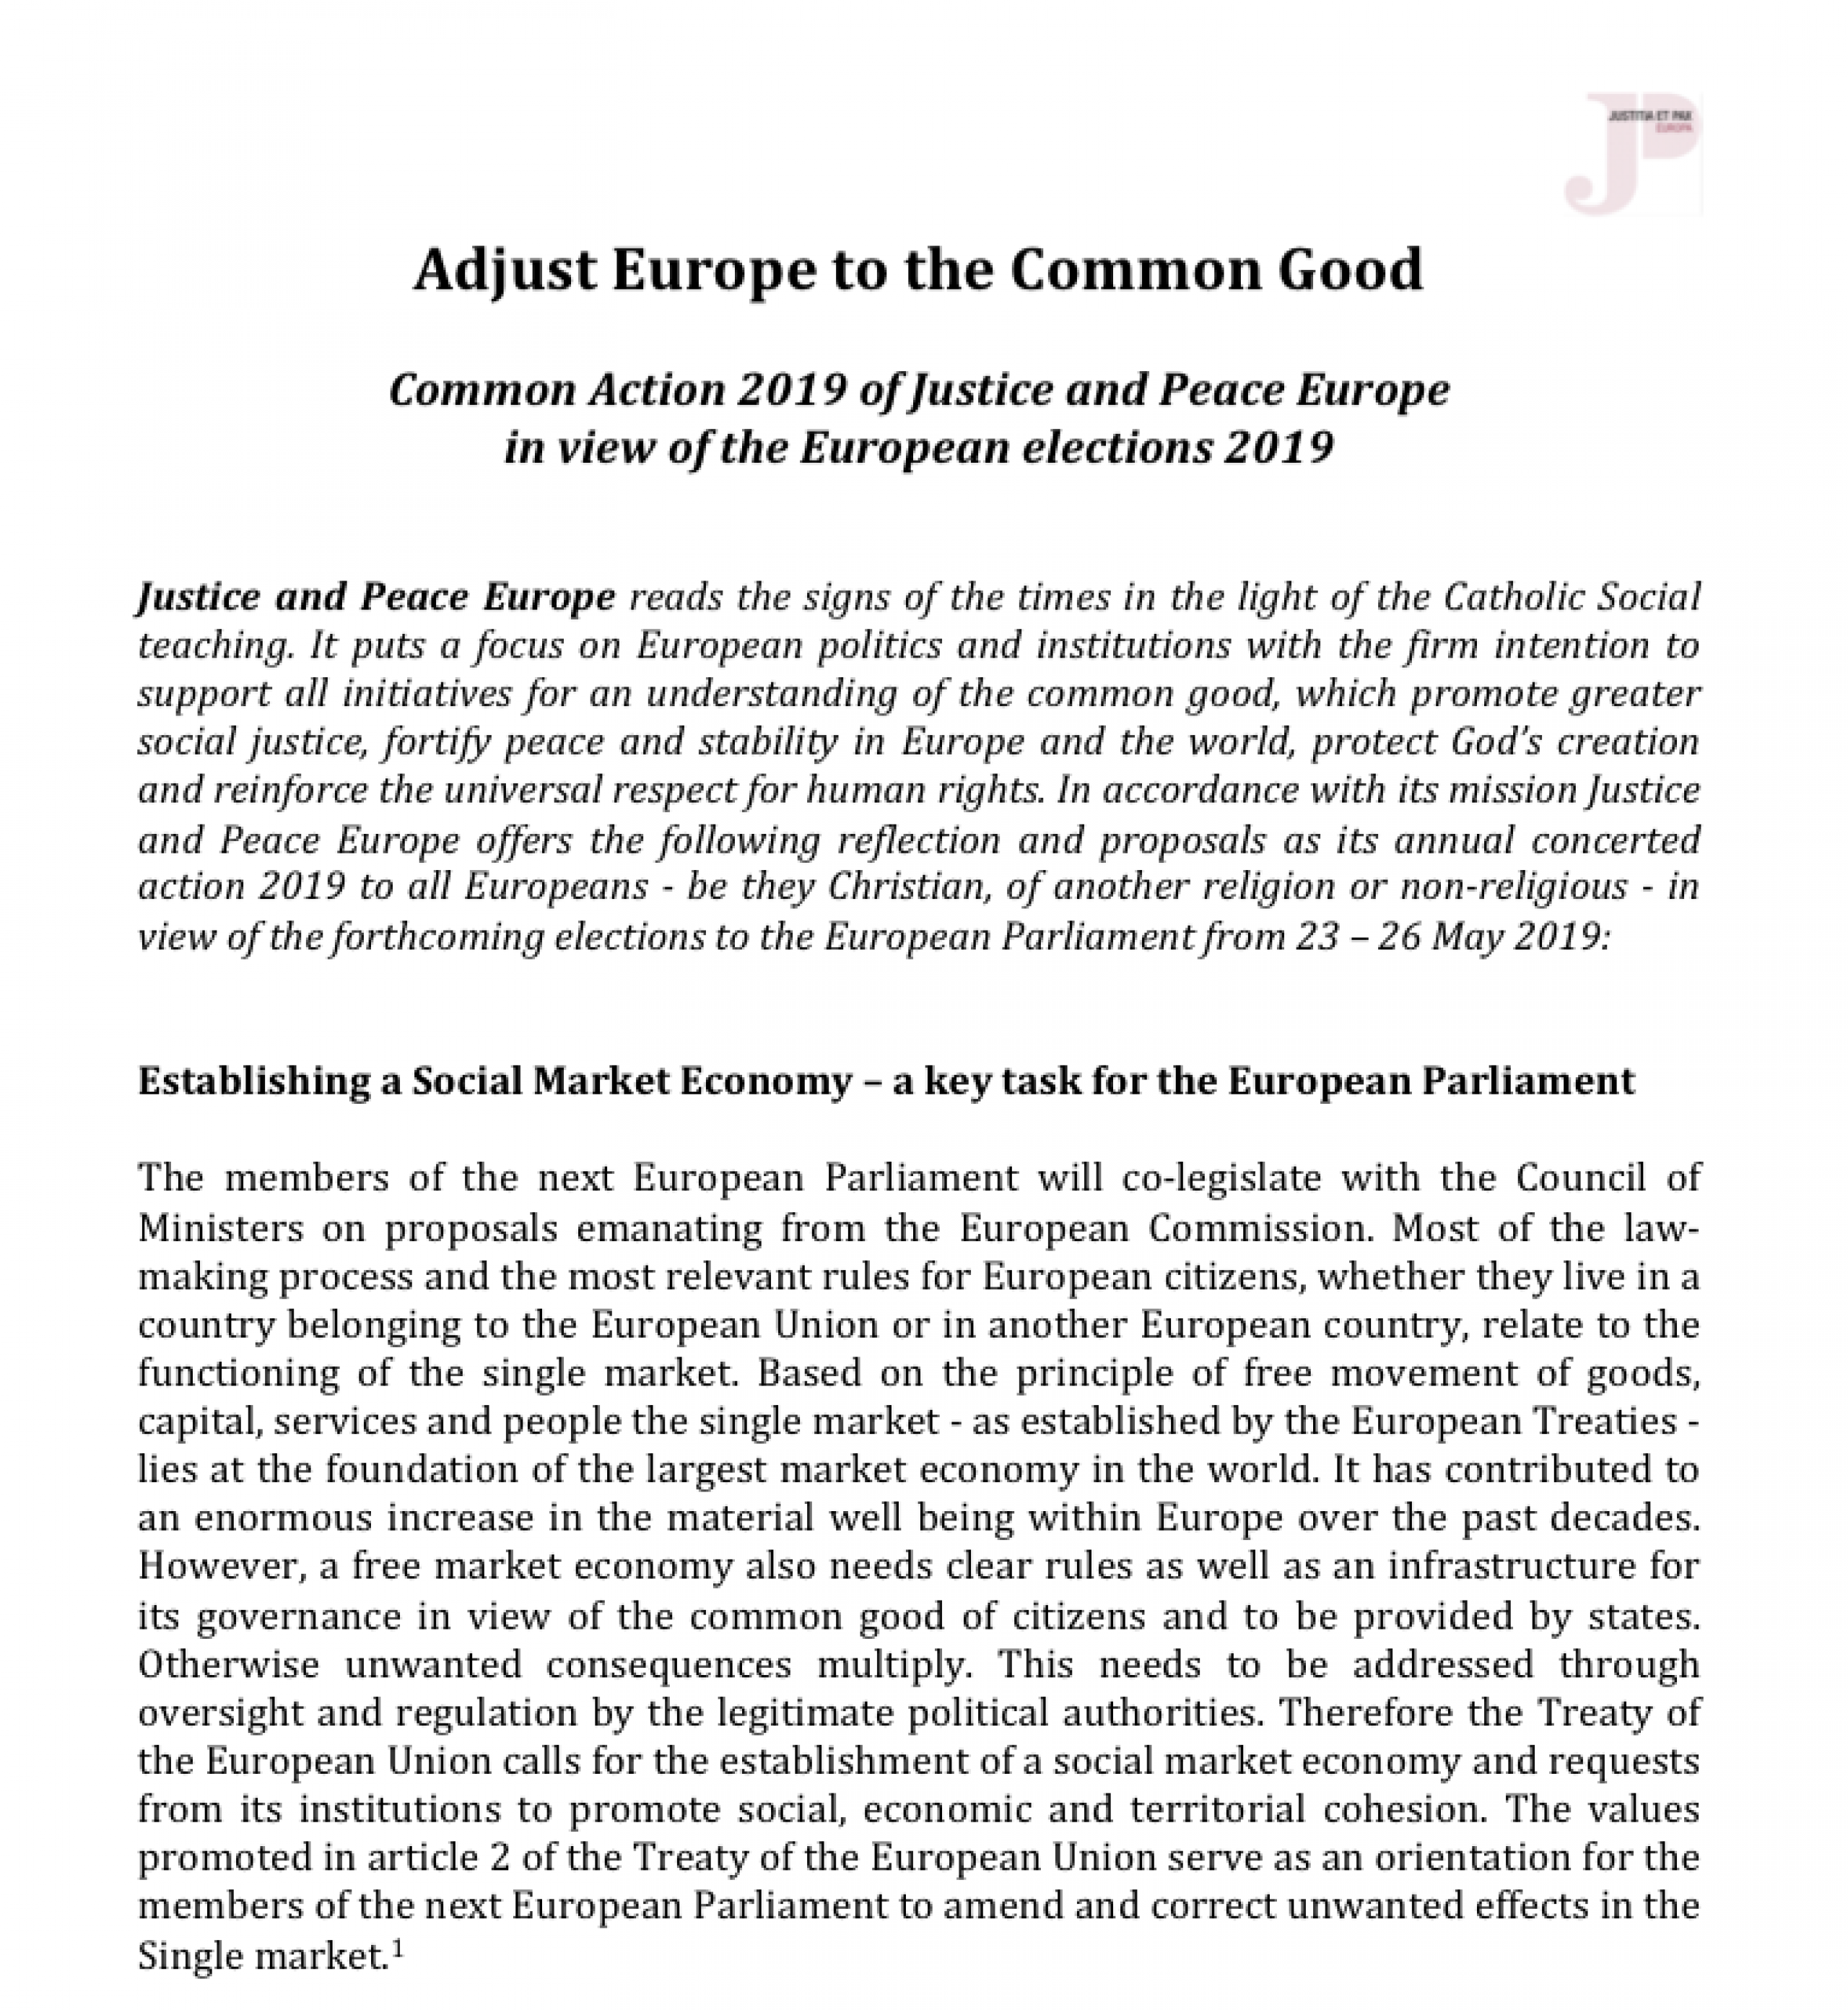 "Adjust Europe to the Common Good" - Justice & Peace Europe Concerted Action 2019 in view of the European elections 